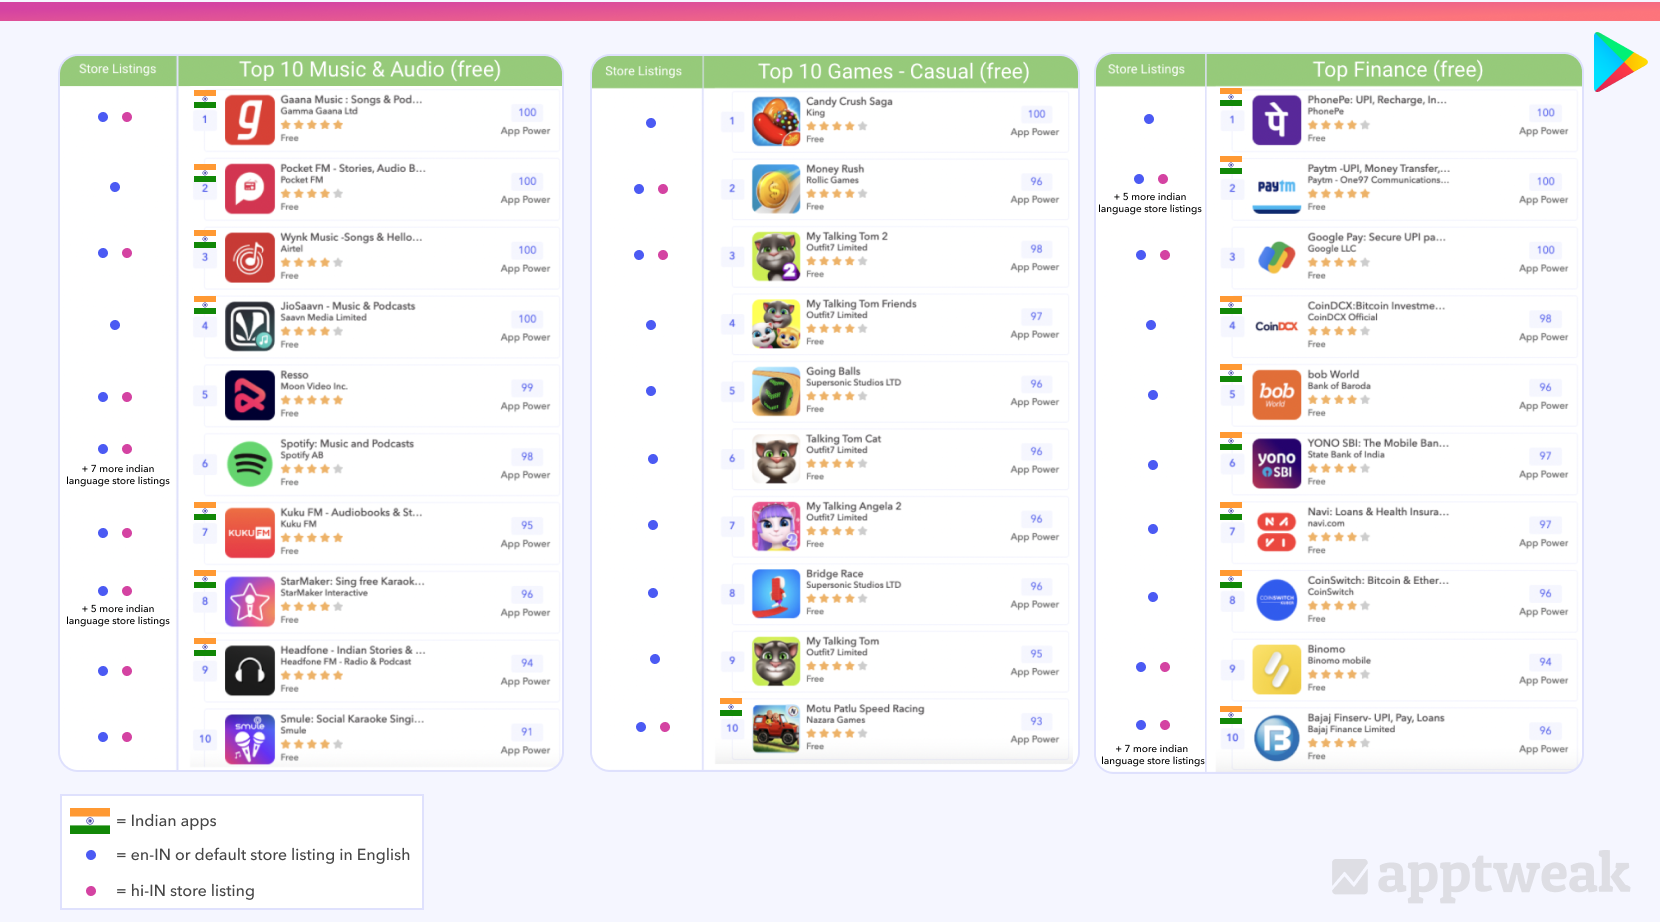 Top 10 apps in Music & Audio, Casual Games, and Finance on the Indian Play Store